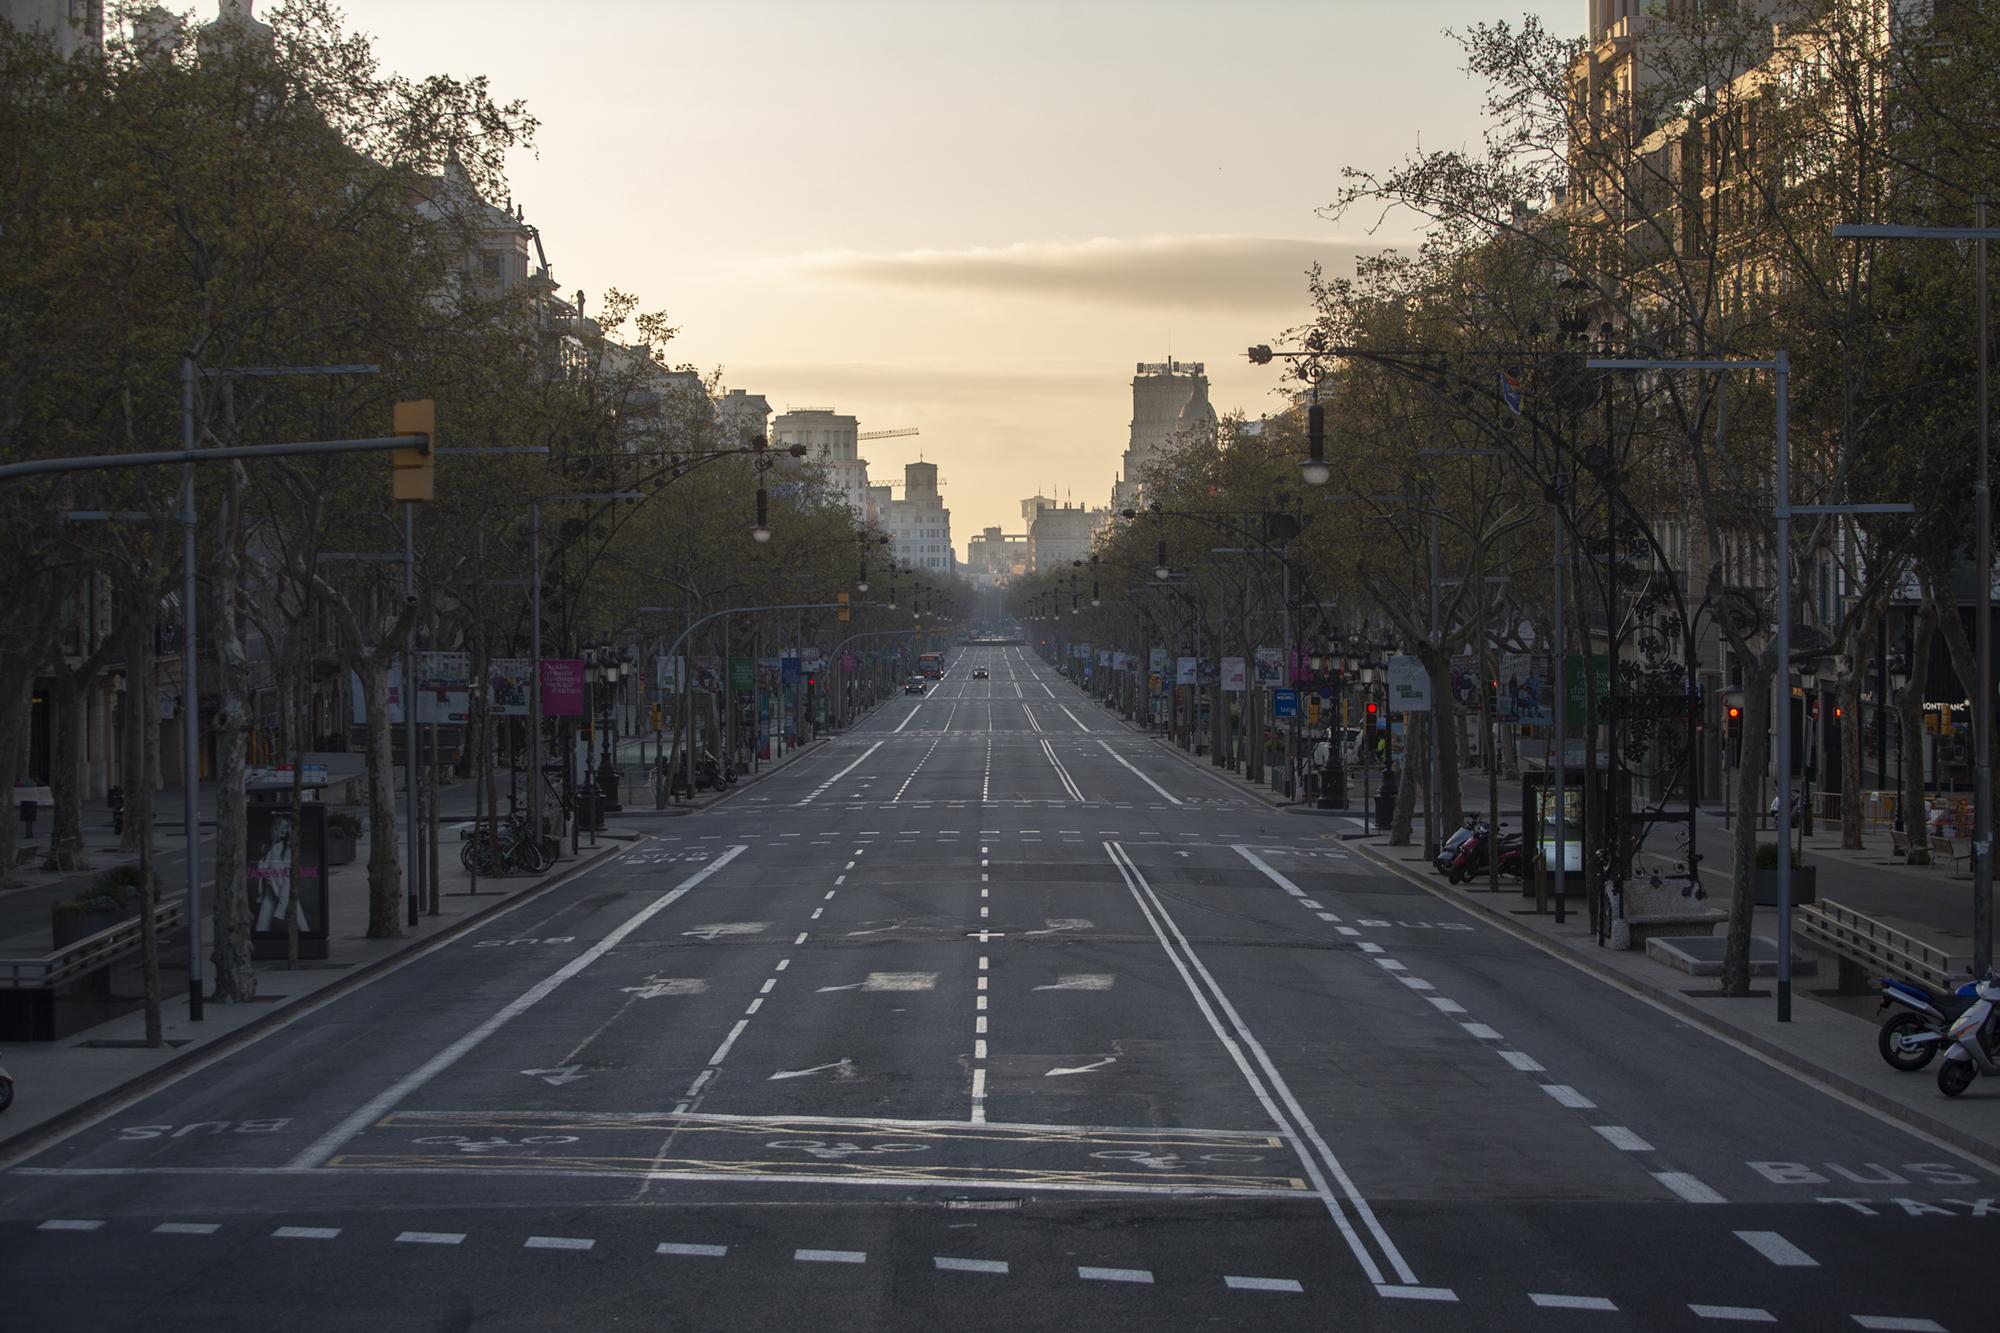 An avenue is seen empty in Barcelona, Spain, Sunday, March 15, 2020. Spain&#39;s government announced Saturday that it is placing tight restrictions on movements and closing restaurants and other establishments in the nation of 46 million people as part of a two-week state of emergency to fight the sharp rise in coronavirus infections. For most people, the new coronavirus causes only mild or moderate symptoms. For some, it can cause more severe illness, especially in older adults and people with existing health problems. (AP Photo/Joan Mateu)